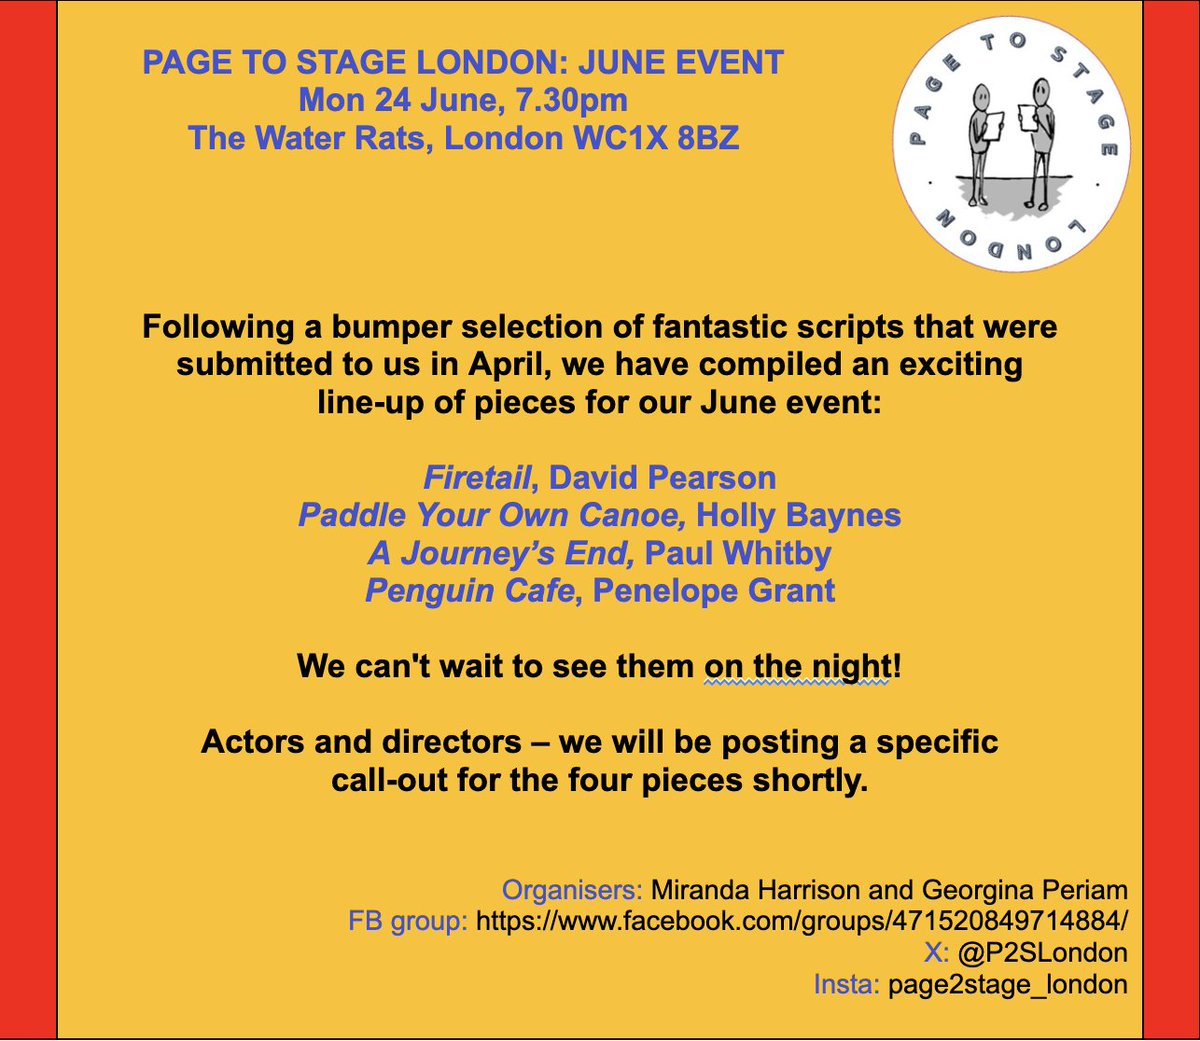 Excited to be planning the June event! If you haven't come along, or haven't taken part before, keep an eye out for our posts in the coming weeks & join us! It's a friendly, fun evening with talented creatives, taking place at London's iconic @Water_Rats venue! #newwriting